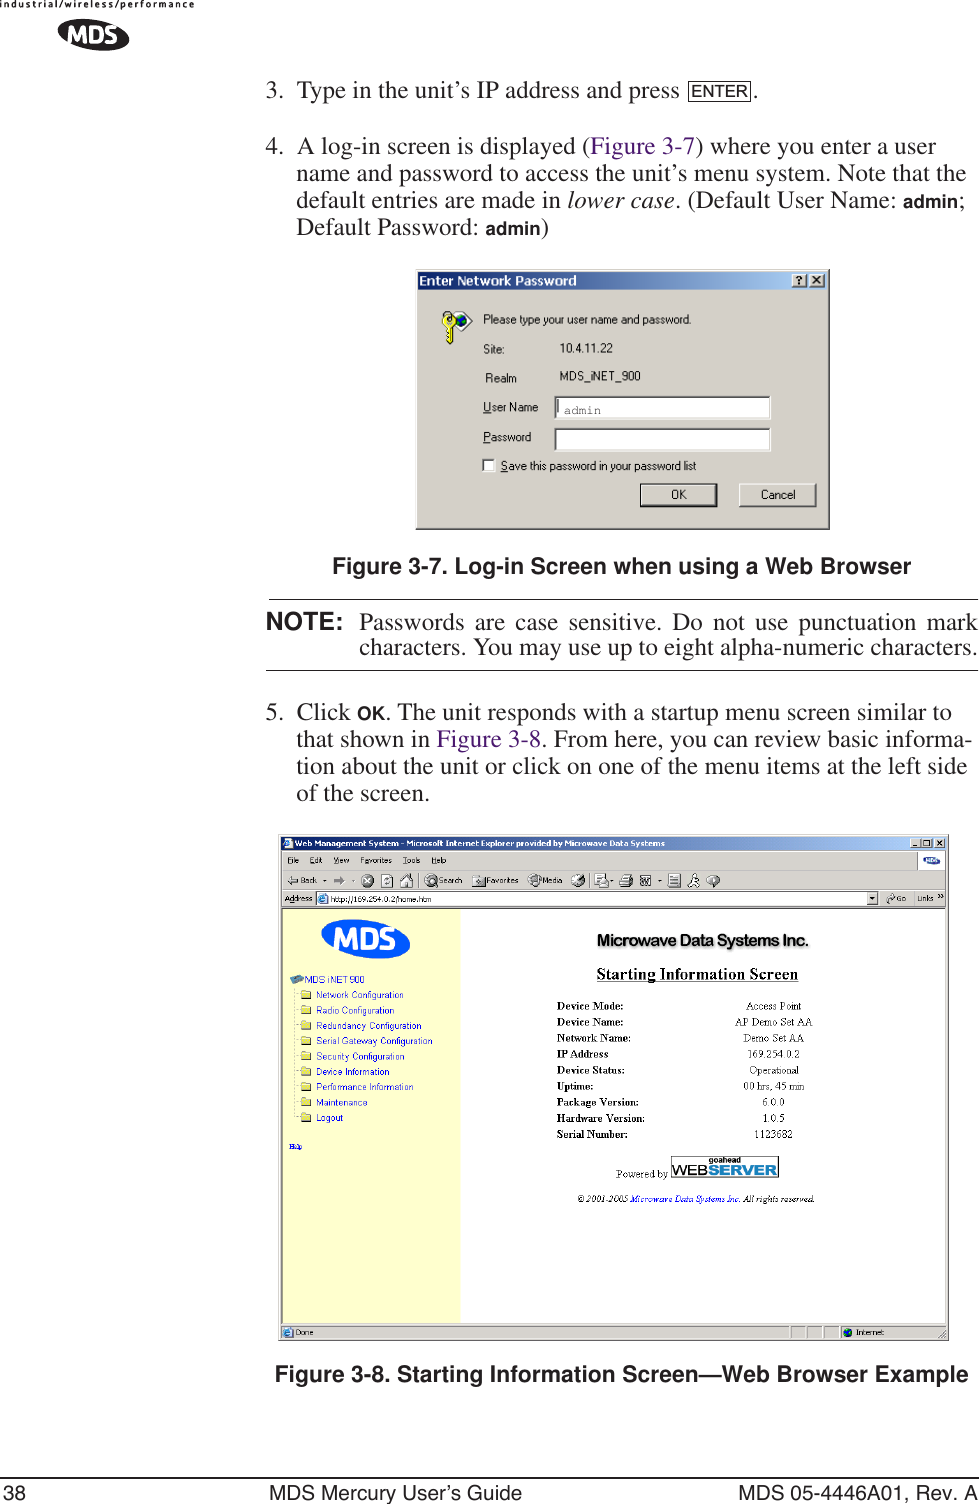 38 MDS Mercury User’s Guide MDS 05-4446A01, Rev. A3. Type in the unit’s IP address and press  .4. A log-in screen is displayed (Figure 3-7) where you enter a user name and password to access the unit’s menu system. Note that the default entries are made in lower case. (Default User Name: admin; Default Password: admin)Invisible place holderFigure 3-7. Log-in Screen when using a Web BrowserNOTE: Passwords are case sensitive. Do not use punctuation markcharacters. You may use up to eight alpha-numeric characters.5. Click OK. The unit responds with a startup menu screen similar to that shown in Figure 3-8. From here, you can review basic informa-tion about the unit or click on one of the menu items at the left side of the screen.Invisible place holderFigure 3-8. Starting Information Screen—Web Browser ExampleENTERadmin